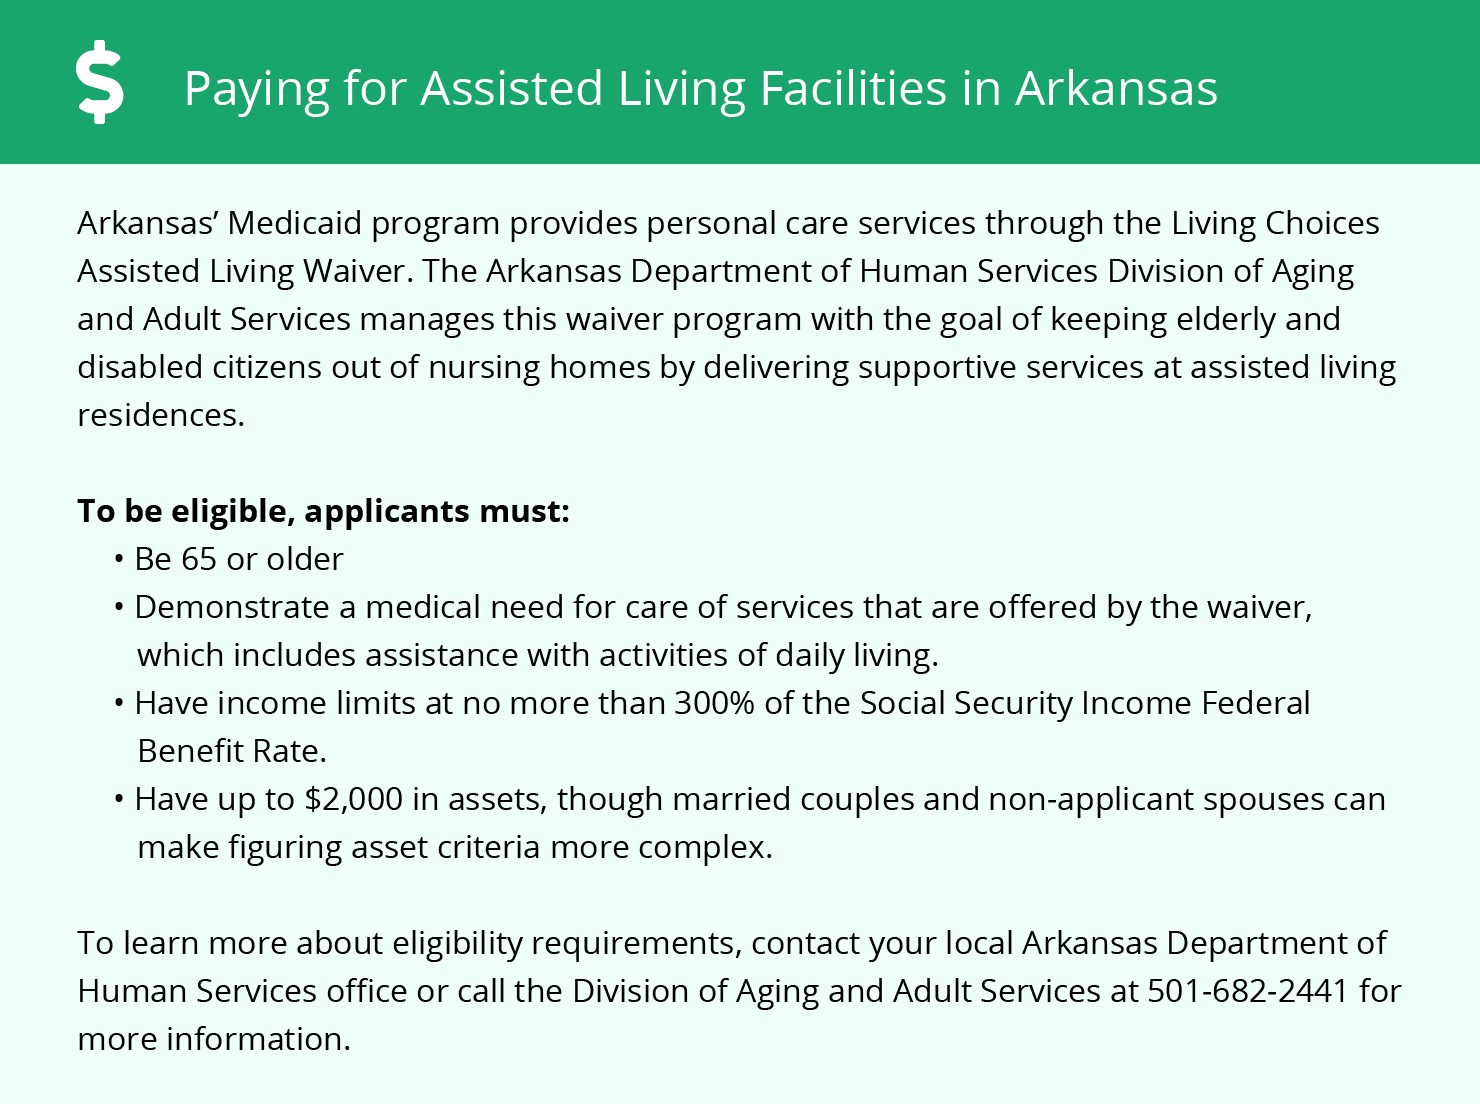 Paying for Assisted Living Facilities in Arkansas